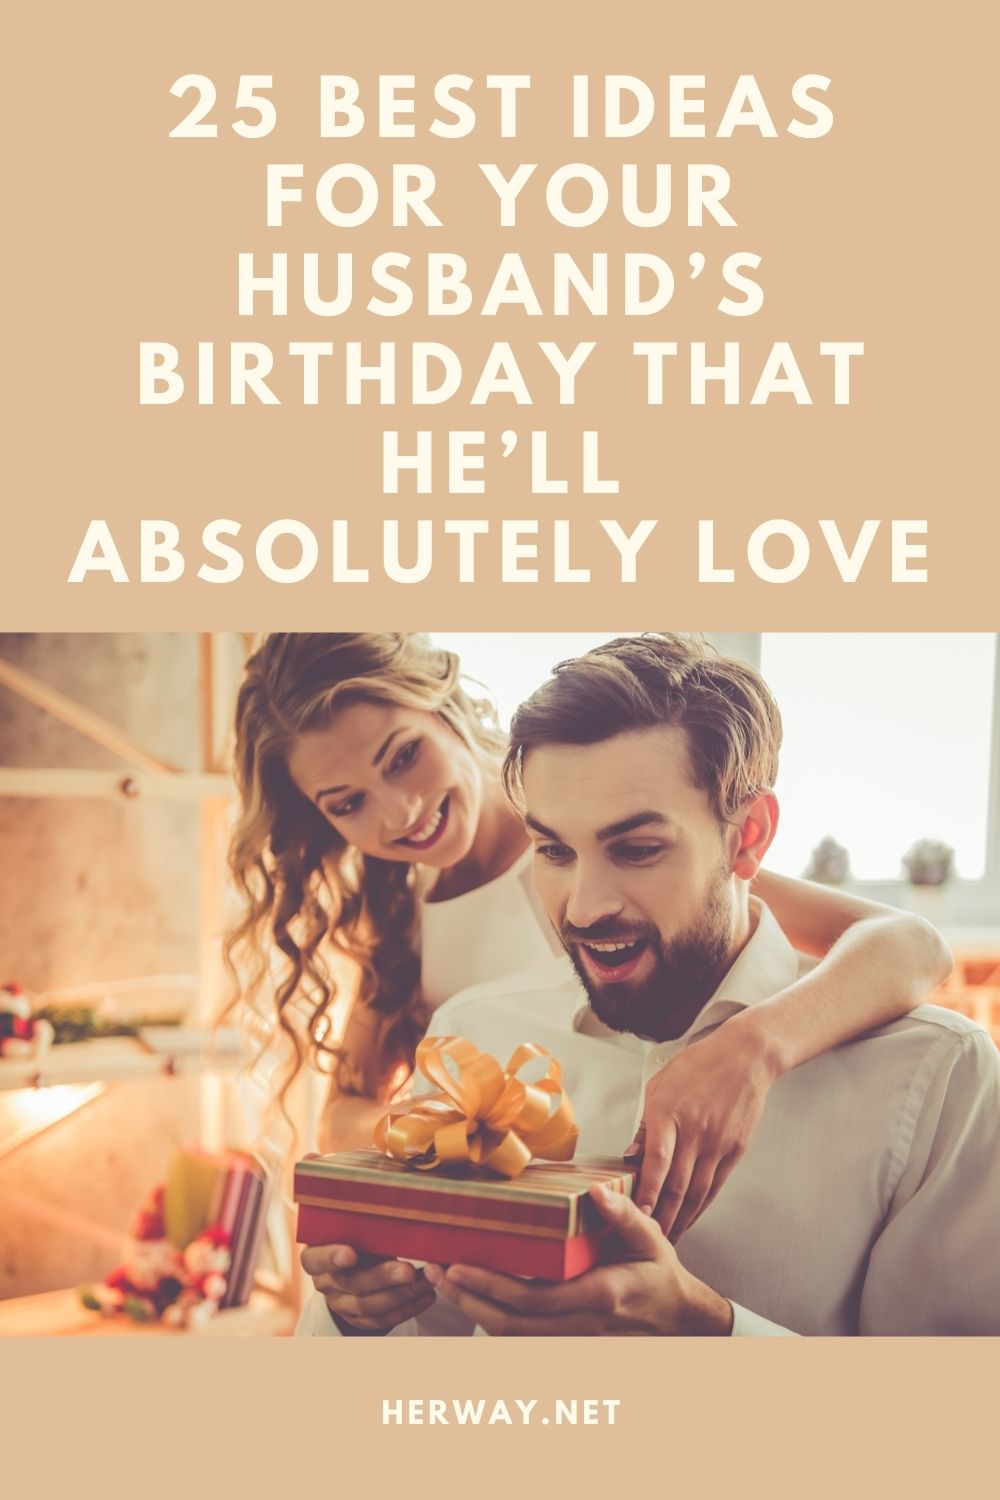 25 Best Ideas For Your Husband’s Birthday That He’ll Absolutely Love